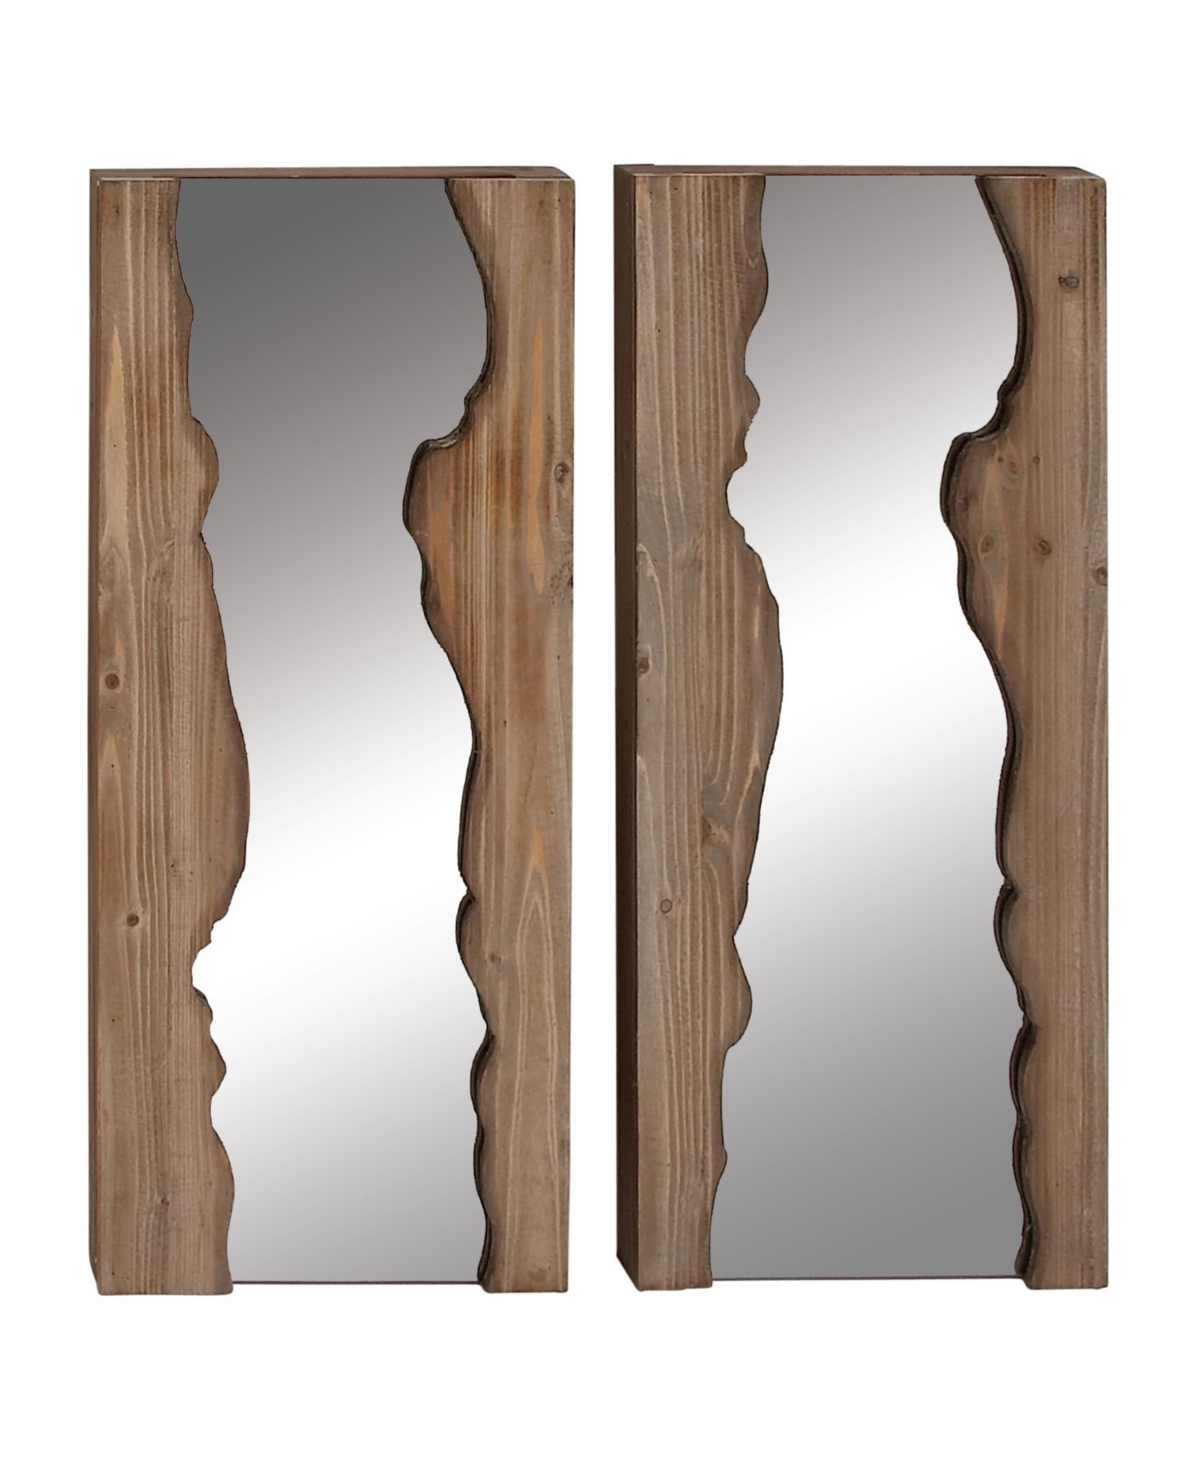 Wood Contemporary Wall Mirror, Set of 2 - Brown